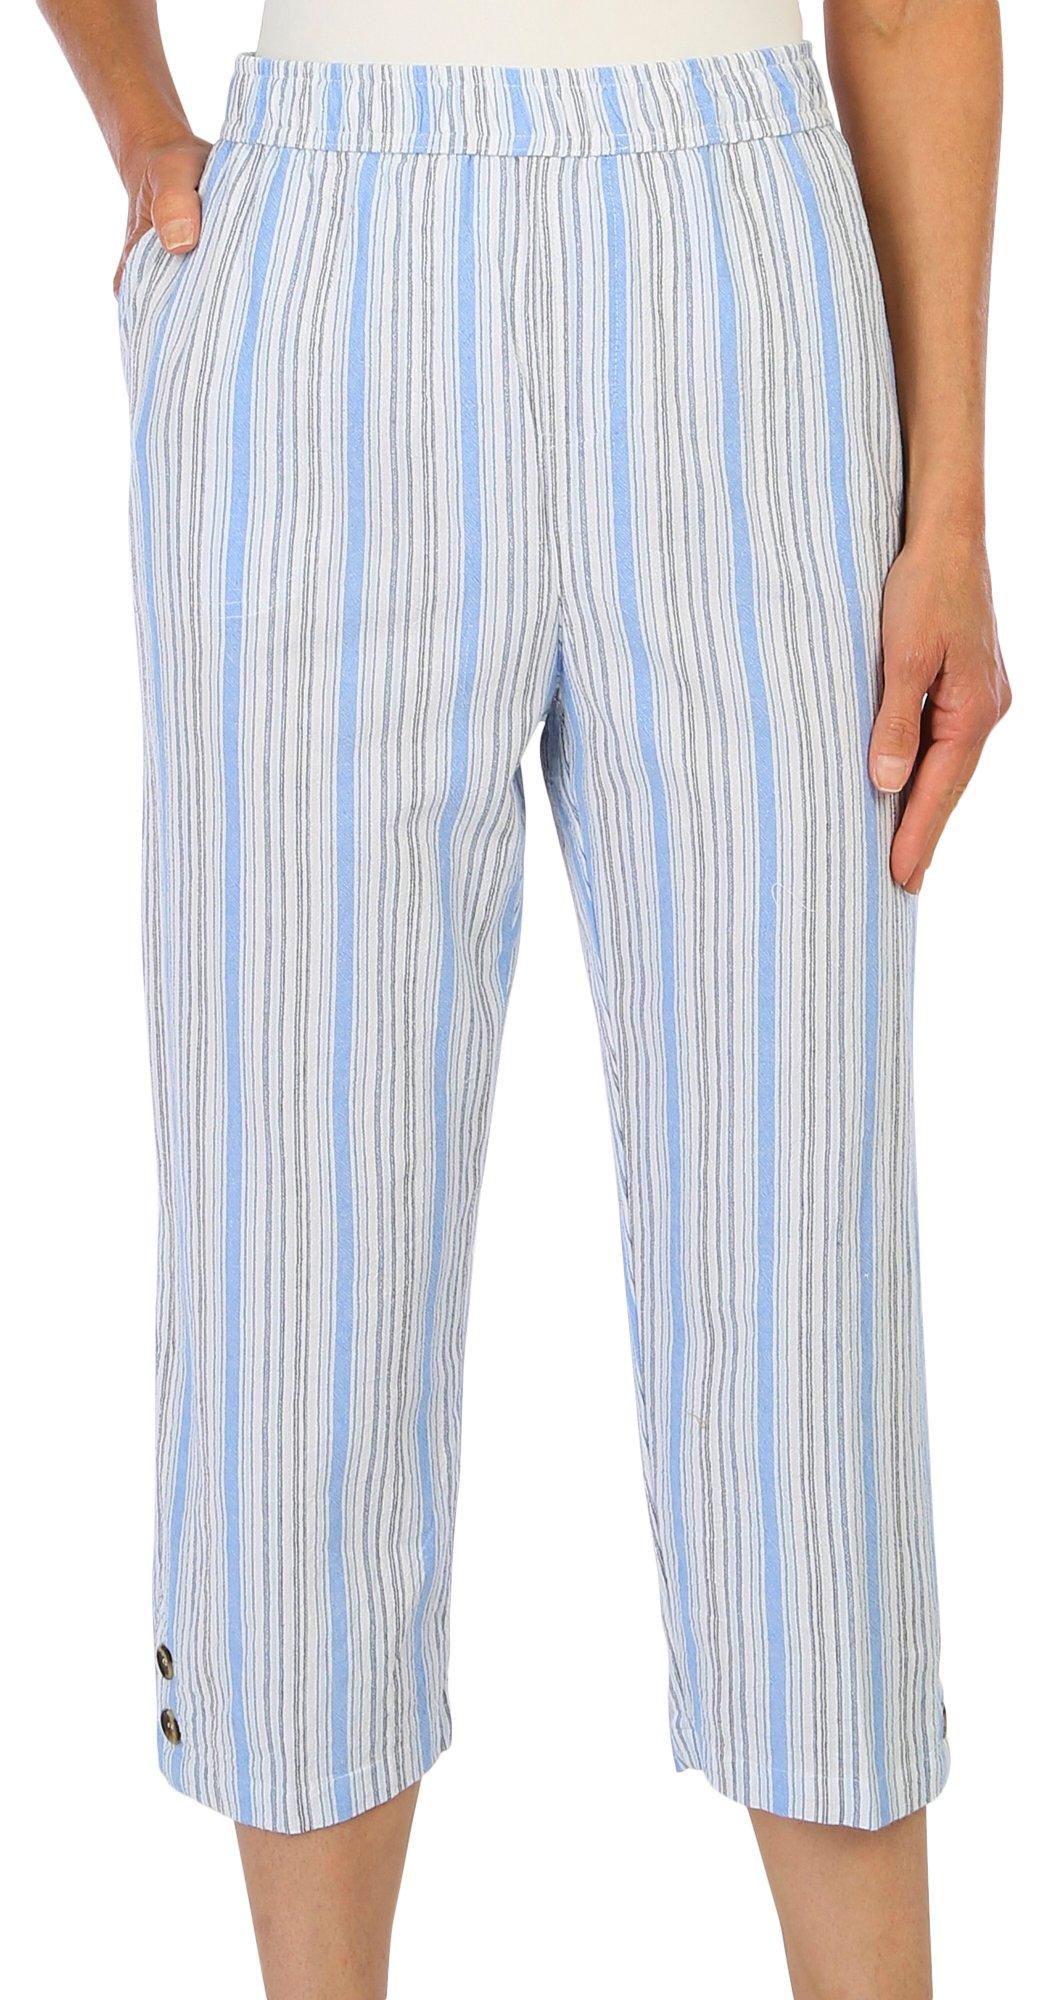 Coral Bay Womens 21 in. Striped Button Hem Capris